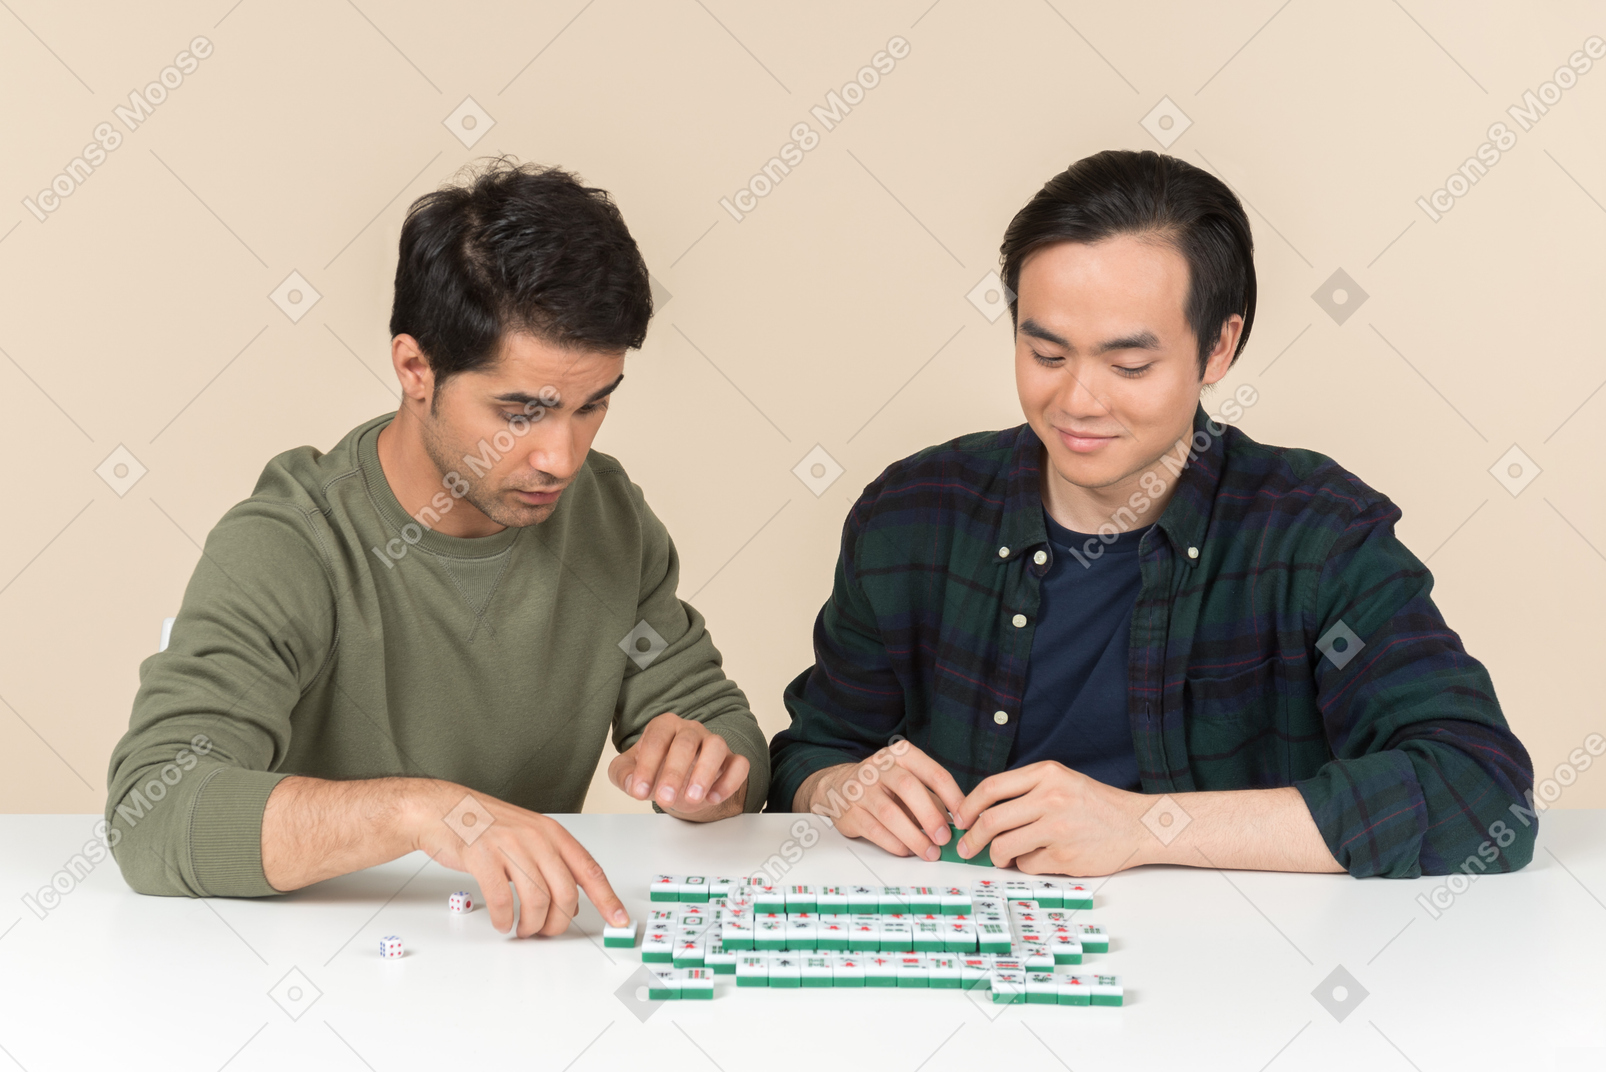 Interracial friends sitting at the table and playing board game